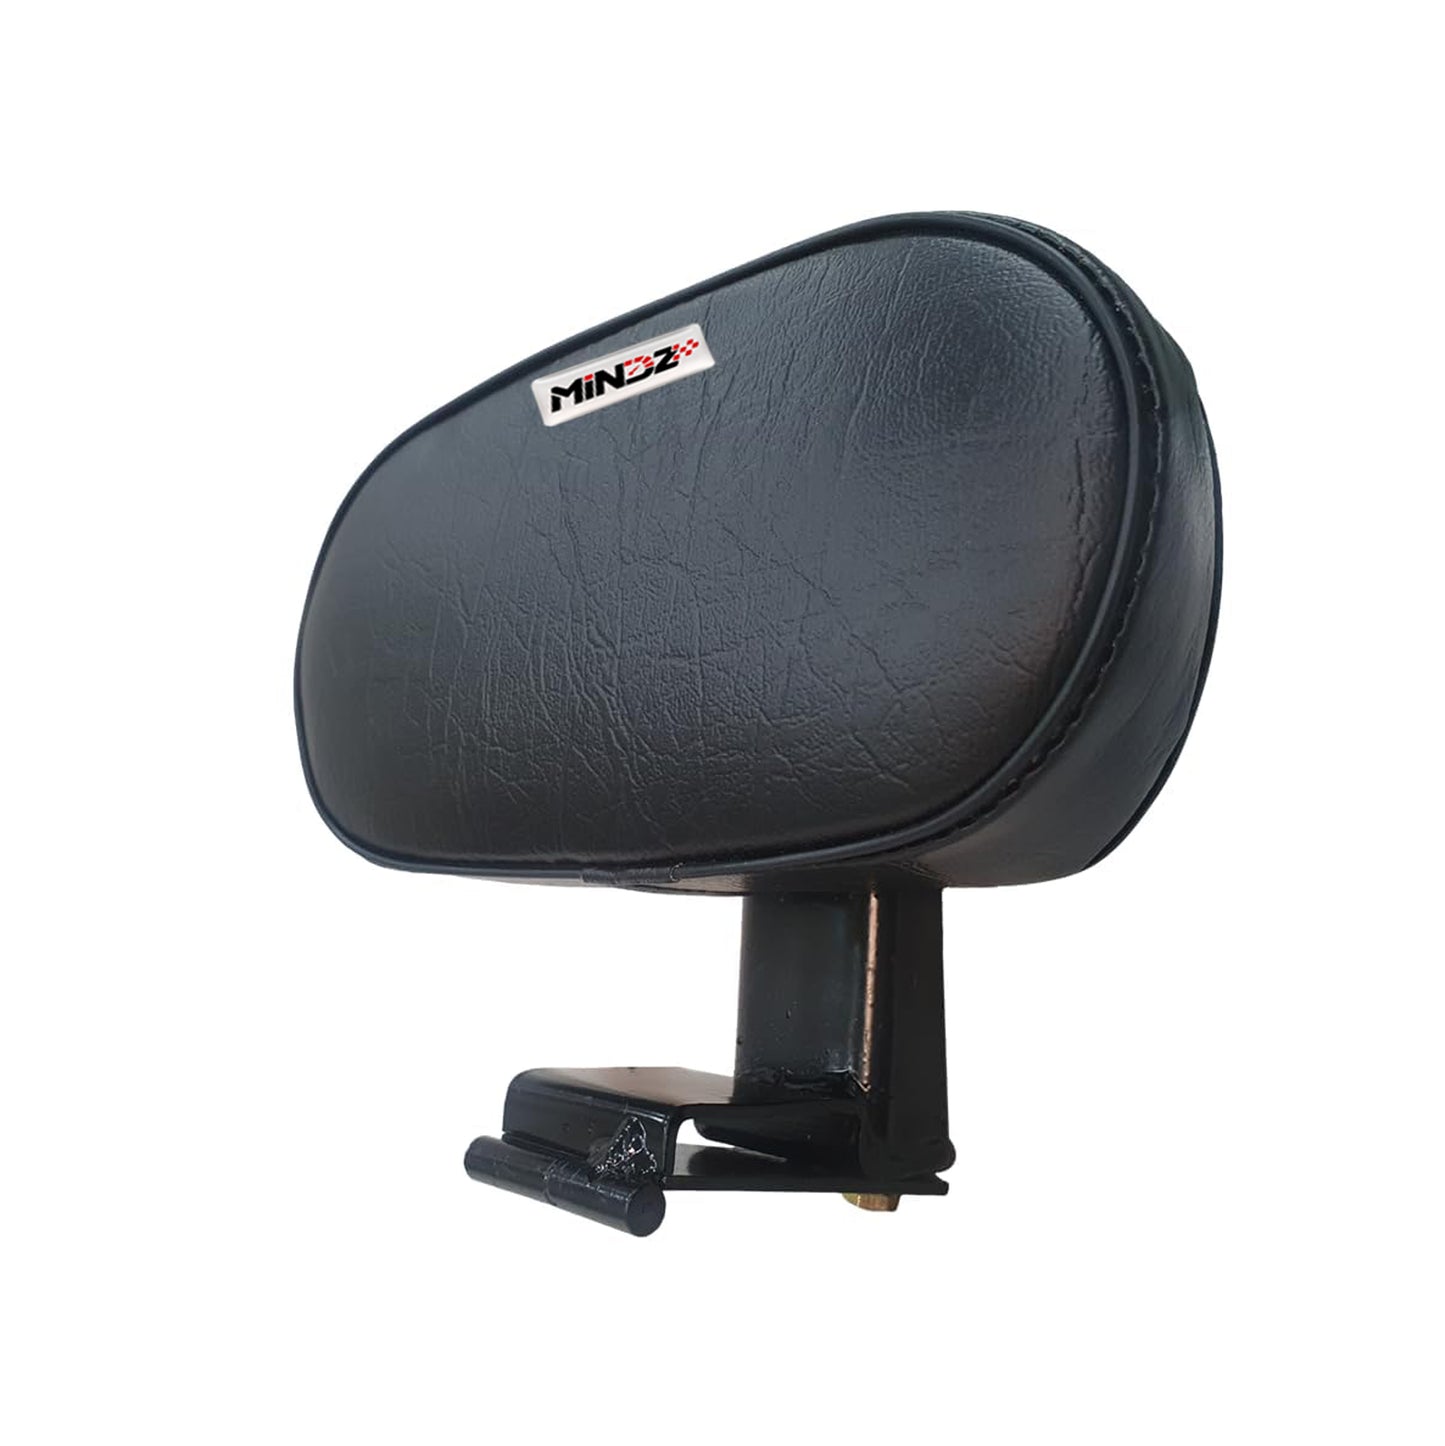 BACKREST FOR 450X & 450 PLUS WITH CUSHIONING